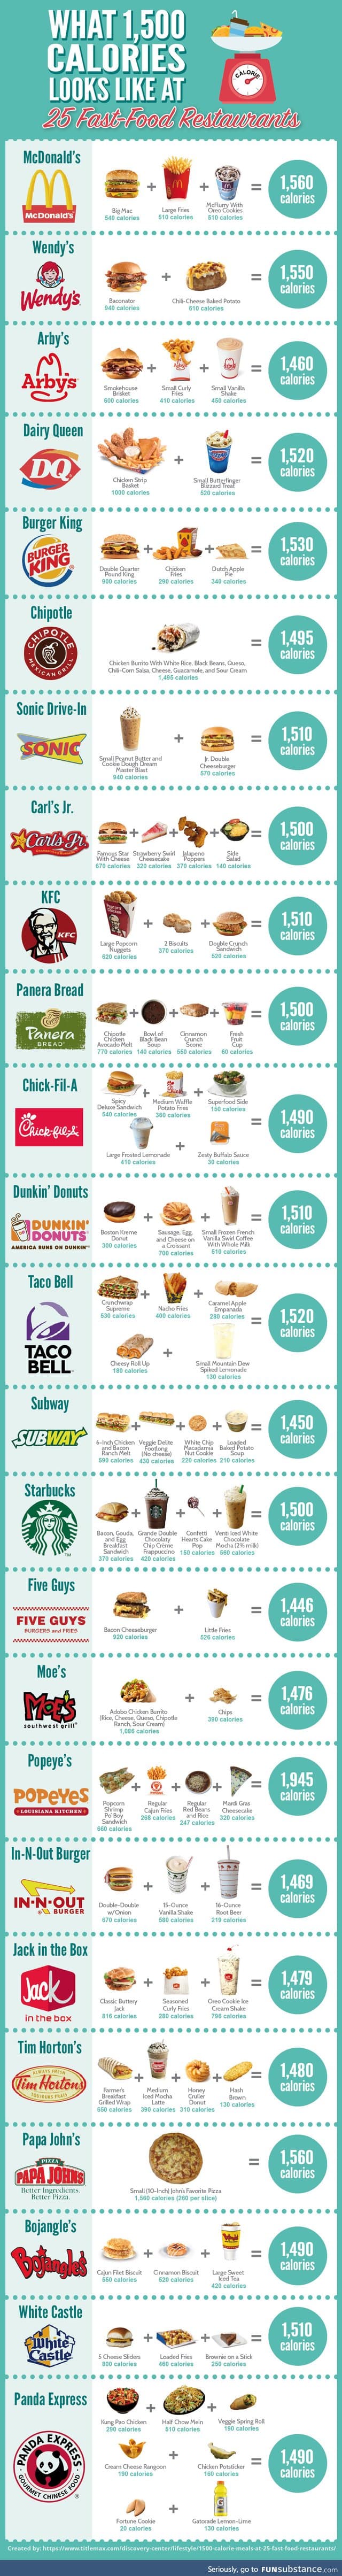 What 1500 calories looks like at 25 fast food joints